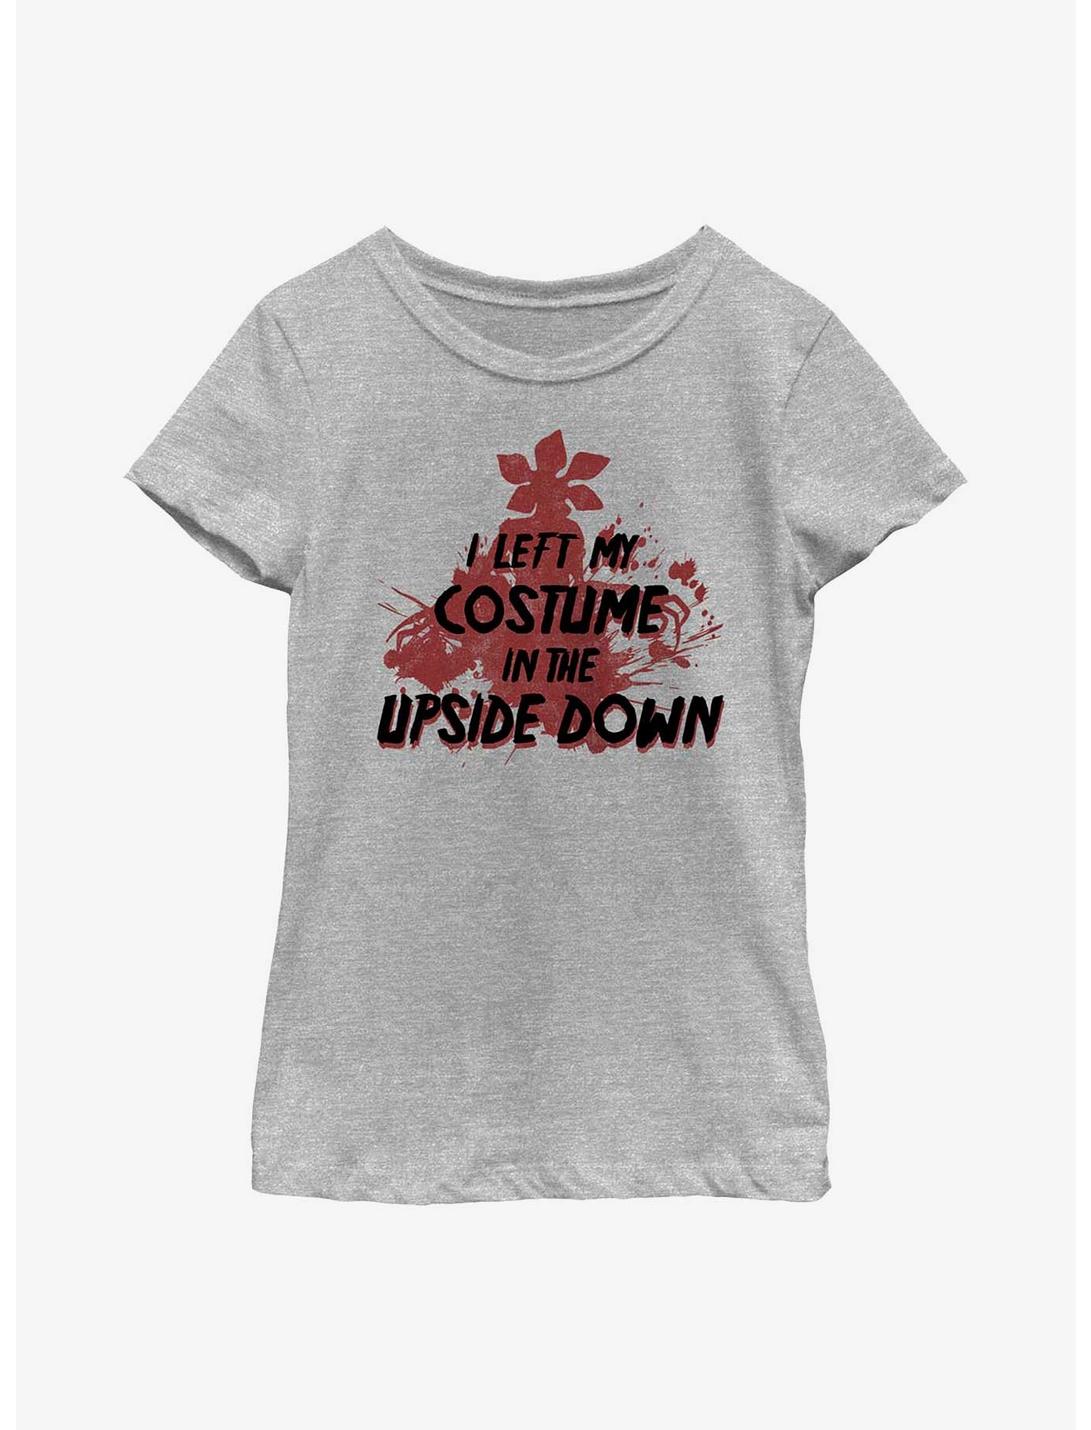 Stranger Things Upside Down Costume Youth Girls T-Shirt, ATH HTR, hi-res